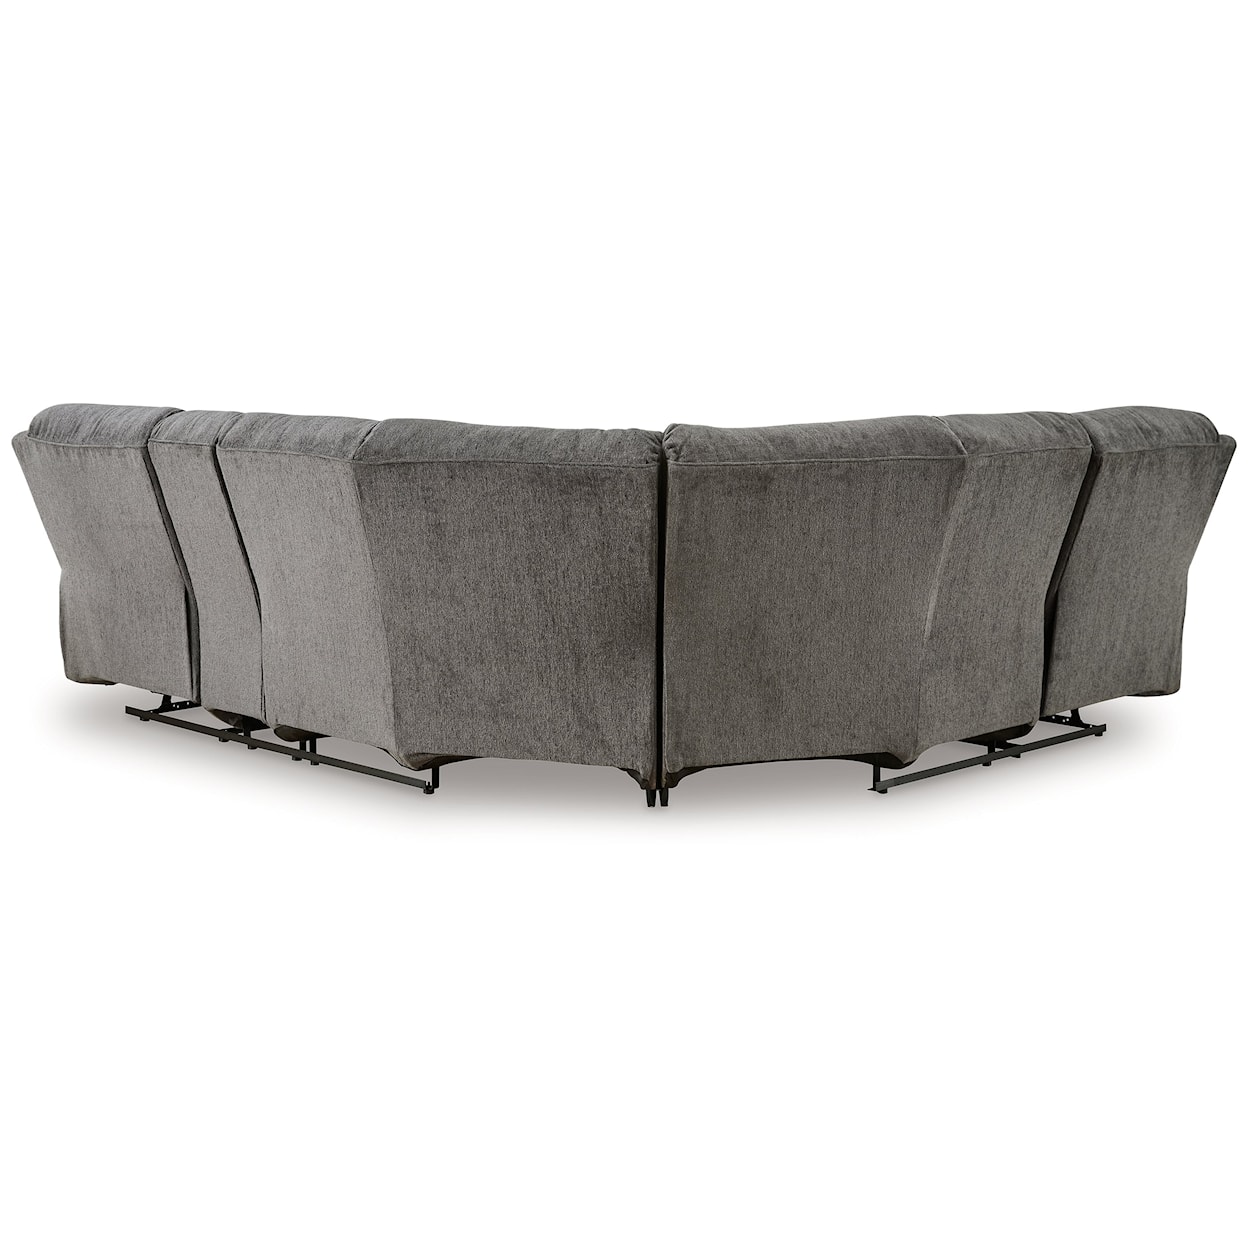 Signature Museum Reclining Sectional